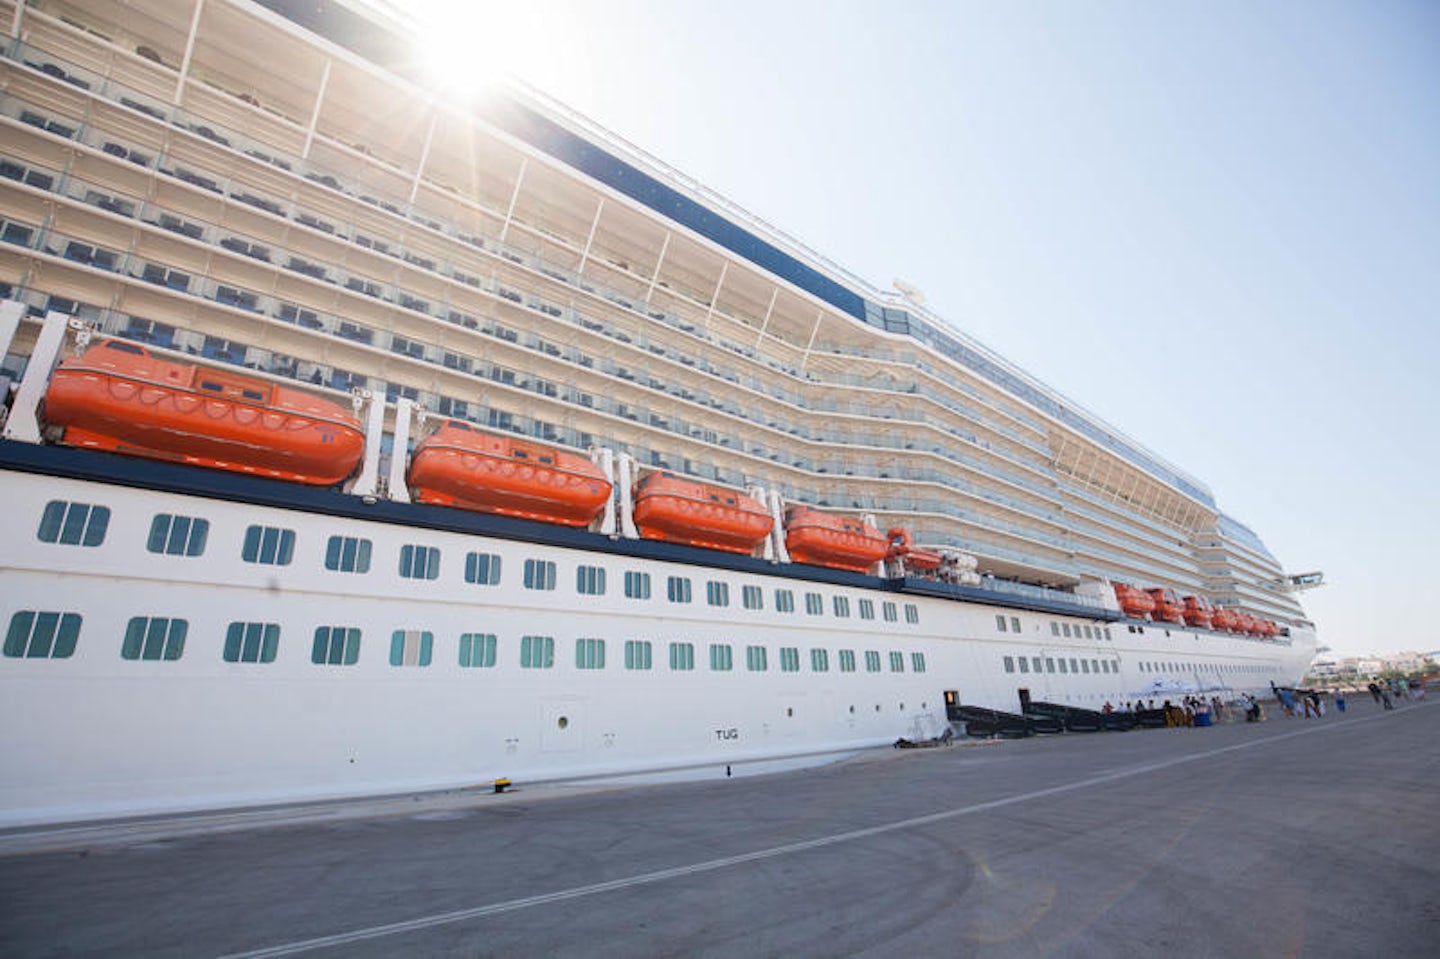 Exterior on Celebrity Reflection